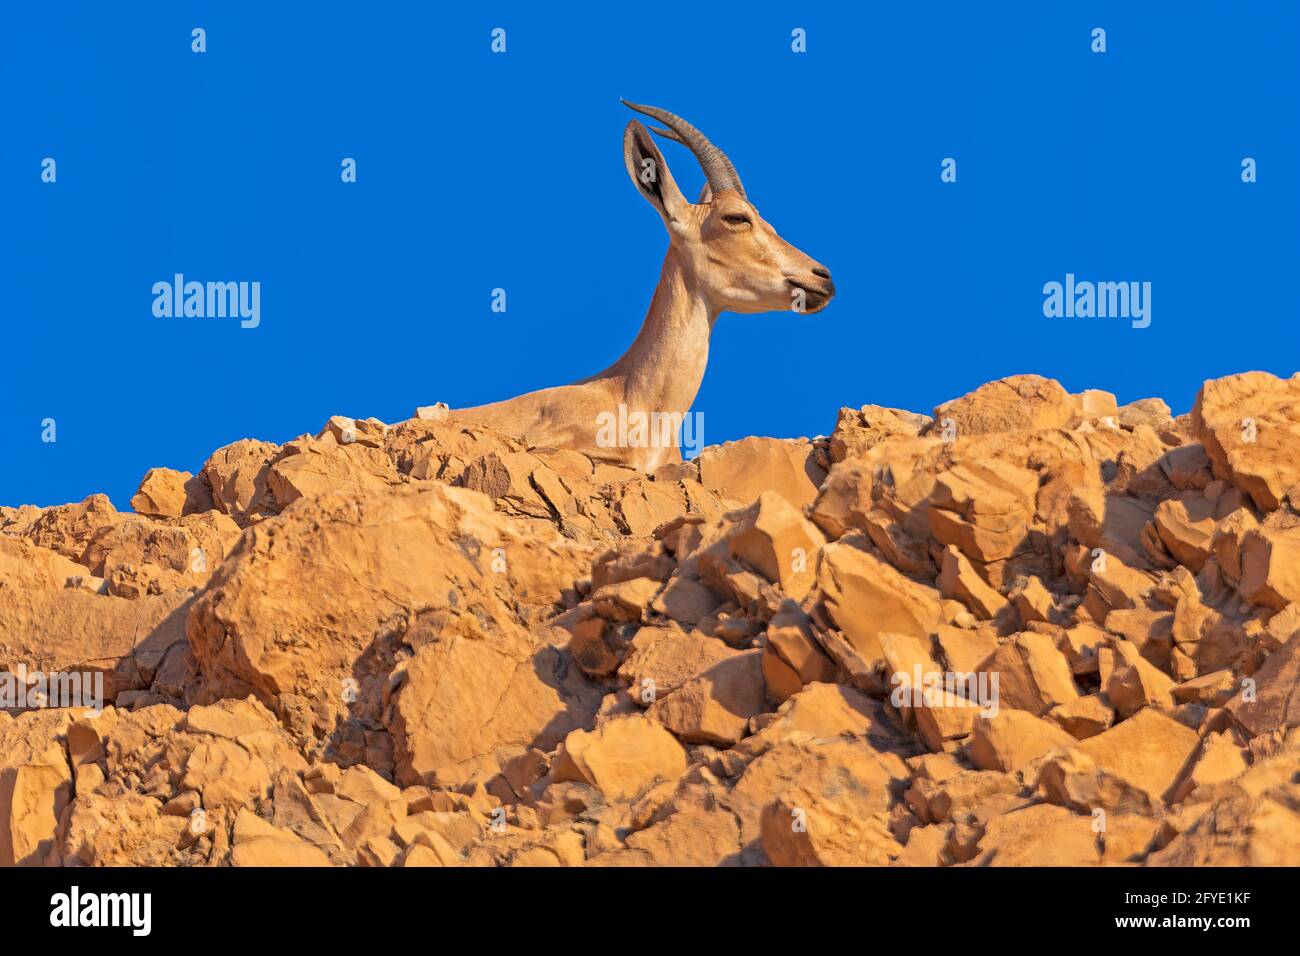 Nubian Ibex Watching From Above on the Cliffs of Masada in Israel Stock Photo